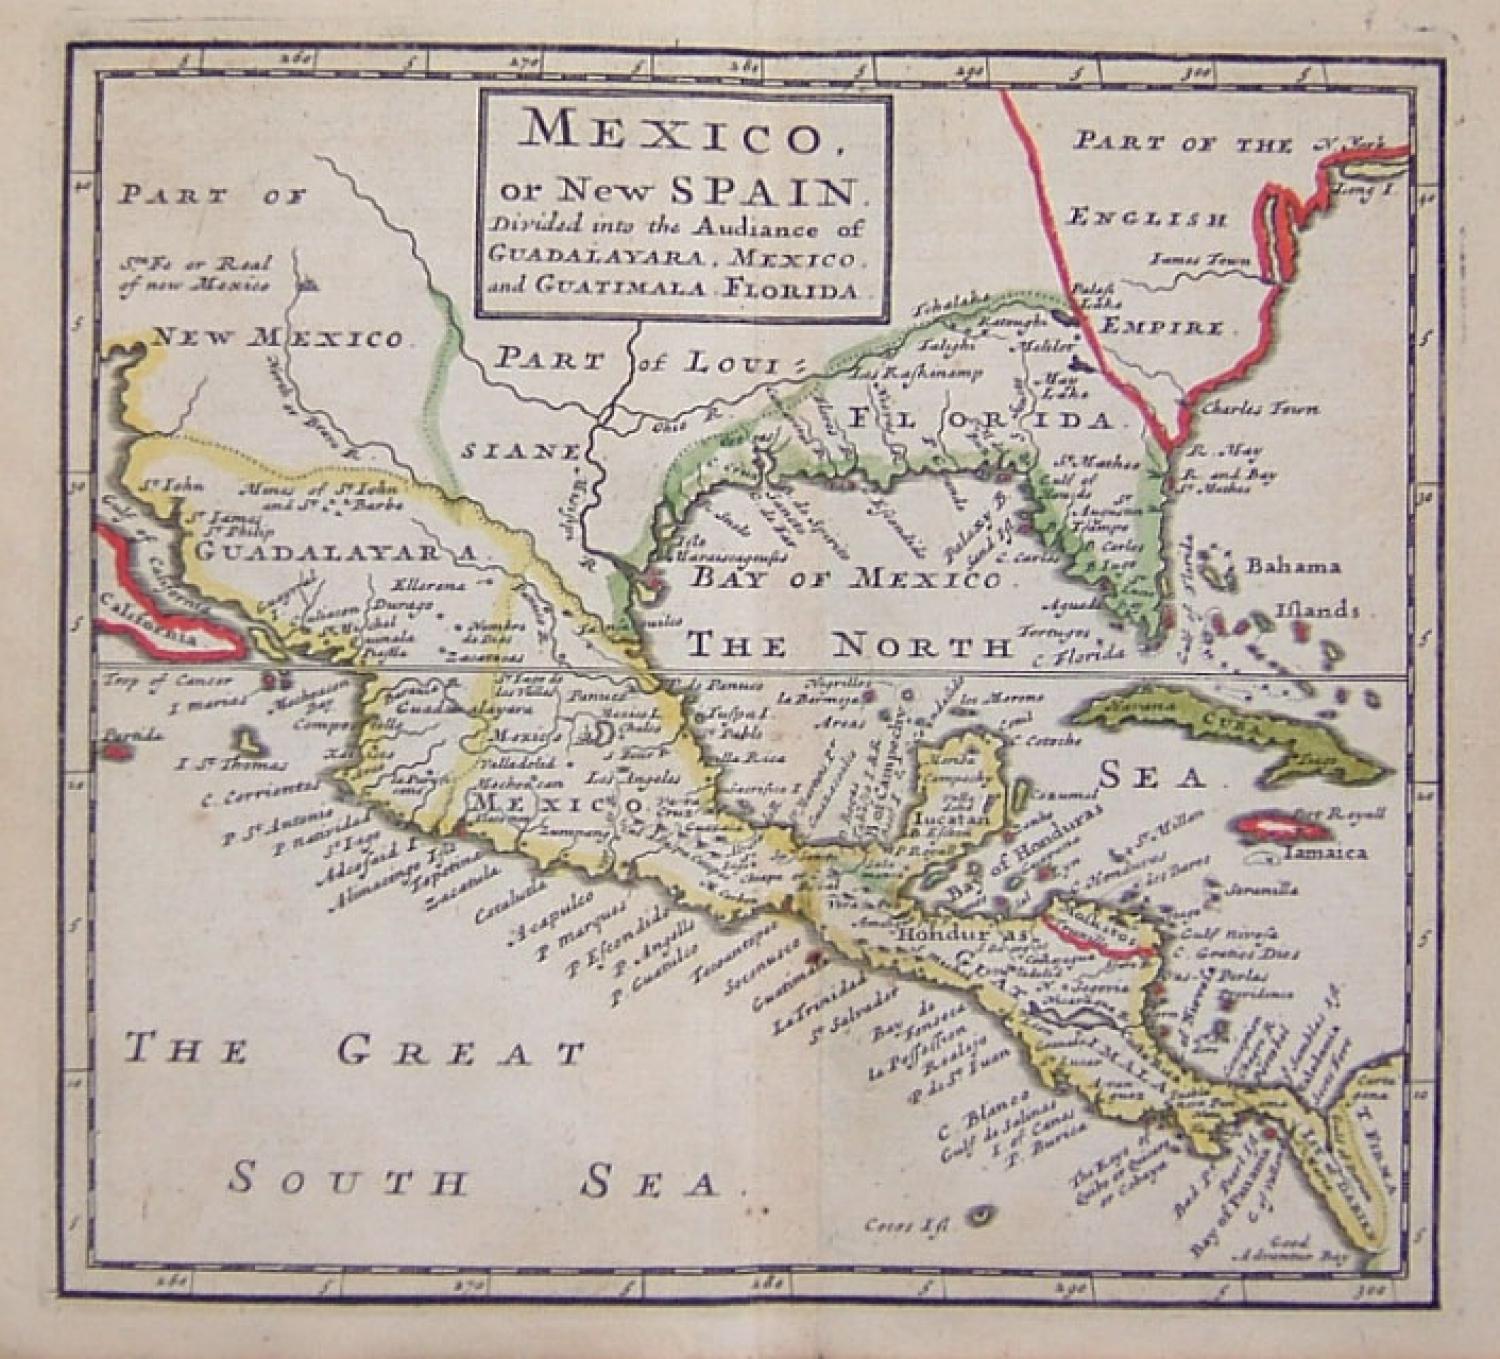 Moll - Mexico or New Spain...